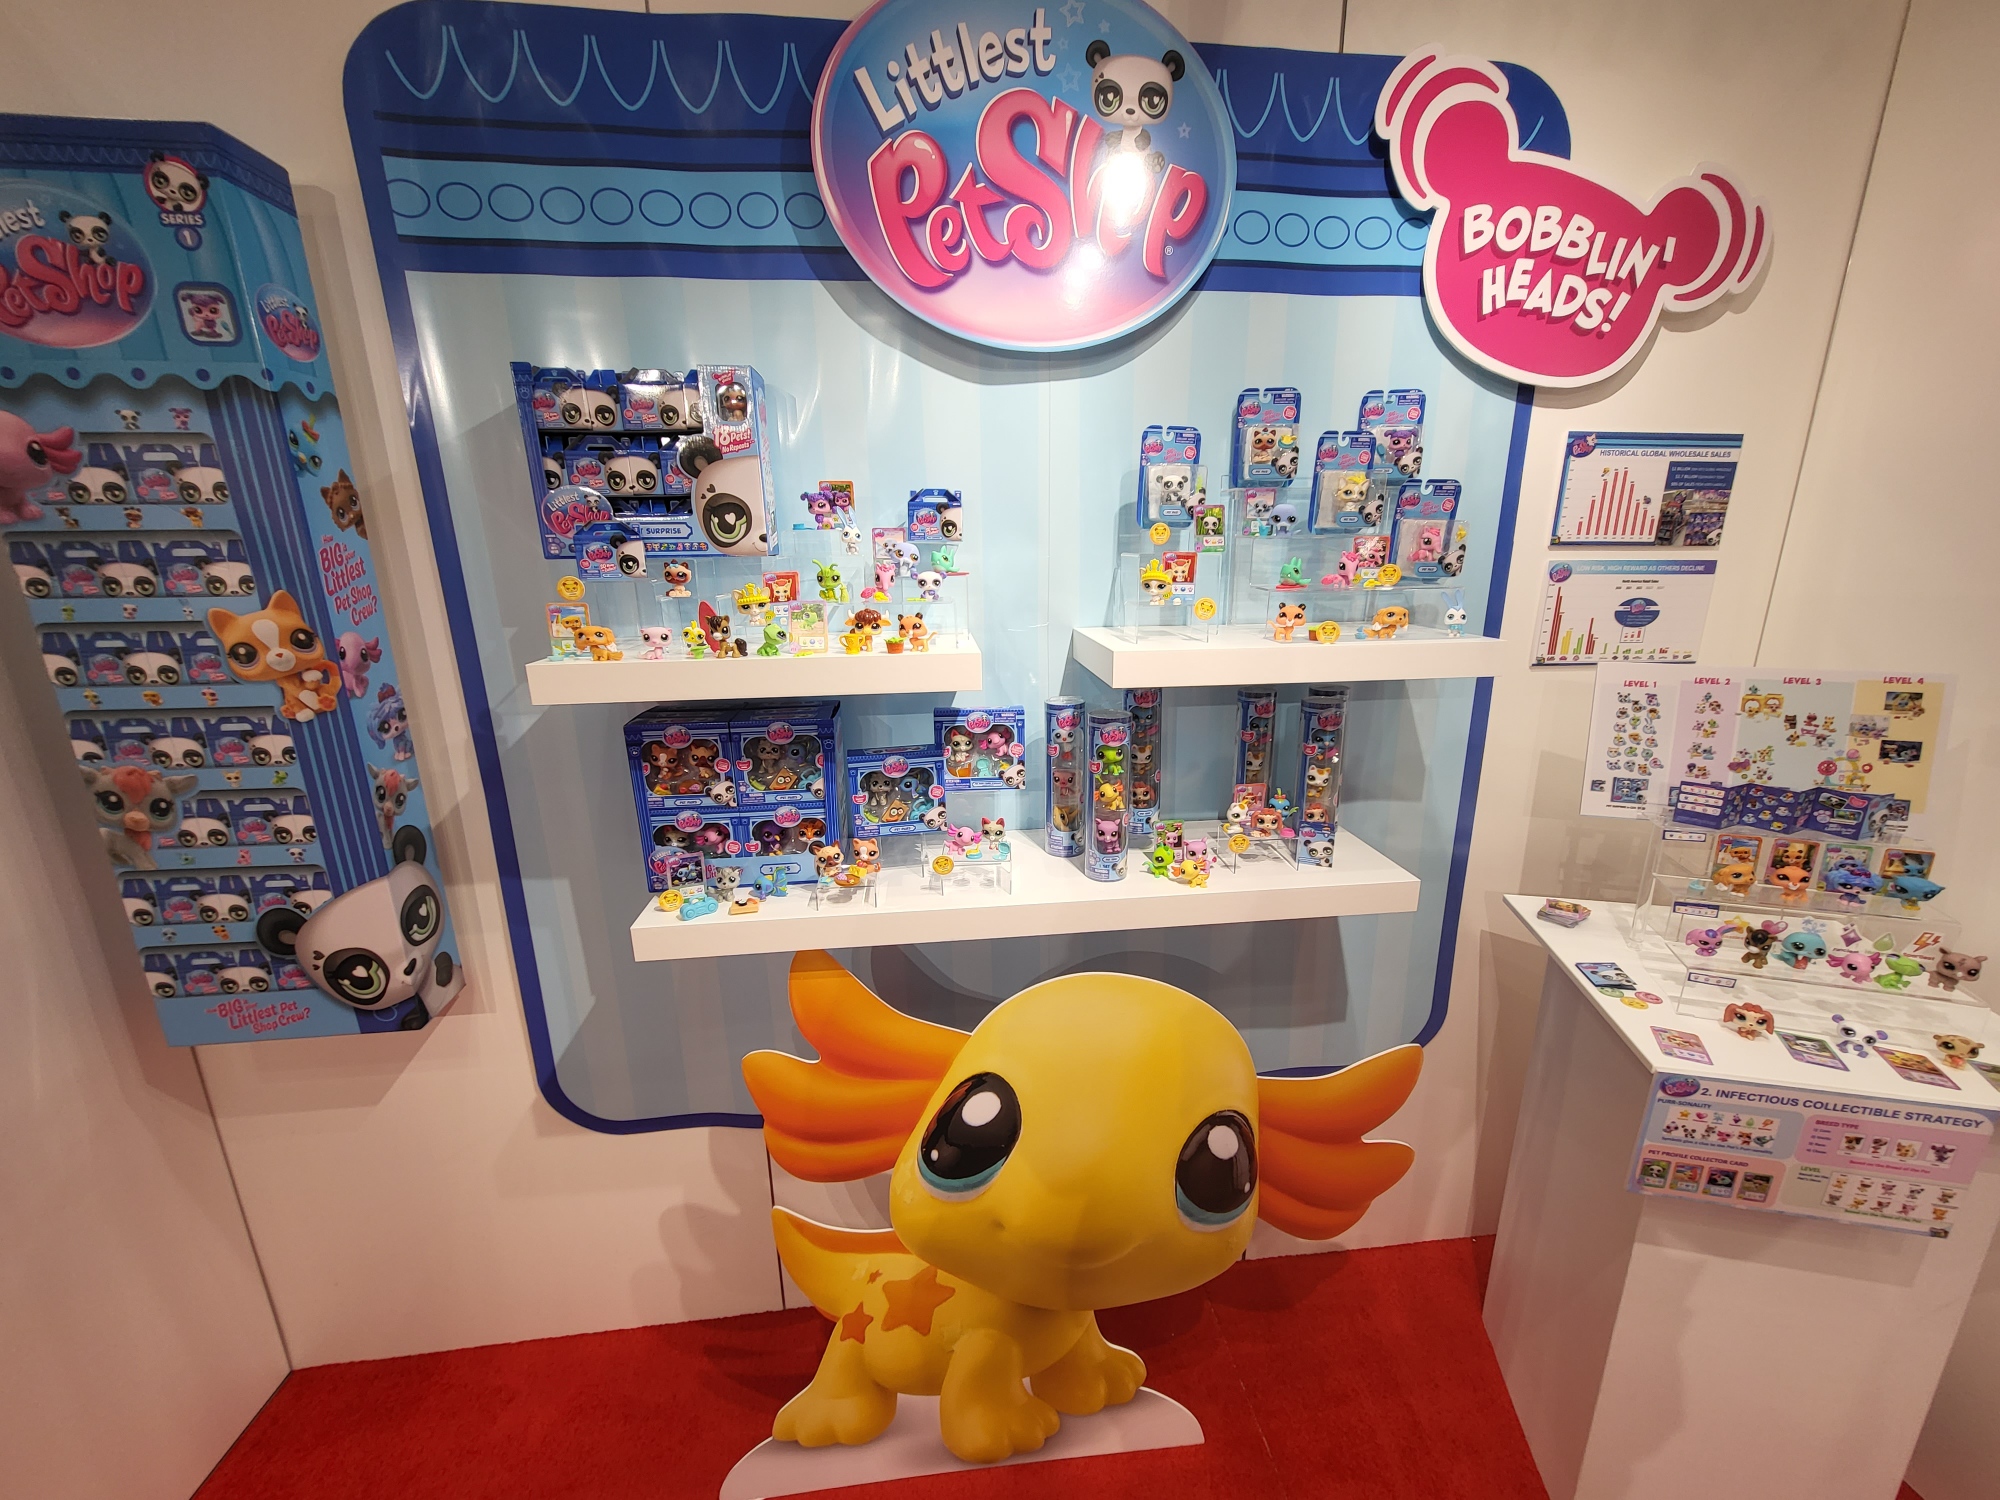 https://static.wikia.nocookie.net/the-littlest-pet-shop-wikia/images/6/68/Basicfun-toyfair-booth.jpg/revision/latest?cb=20231001042107